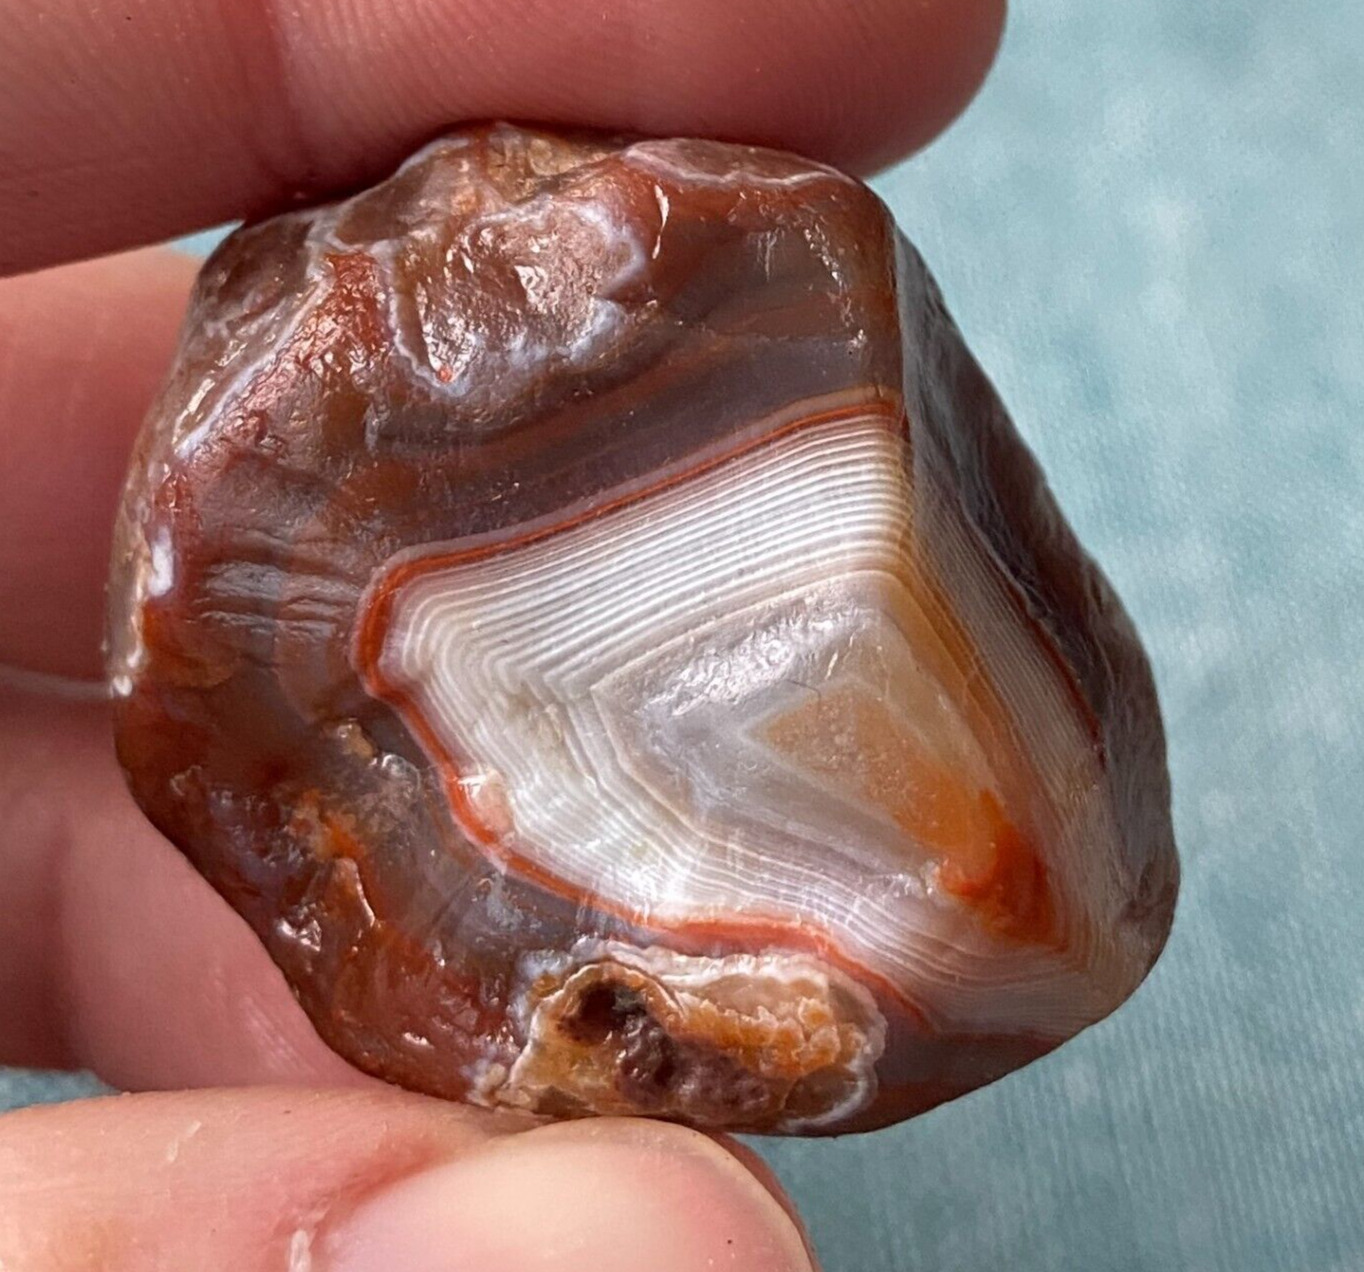 0.96 Oz Lake Superior Agate - Strong White Banding & Deep Reds